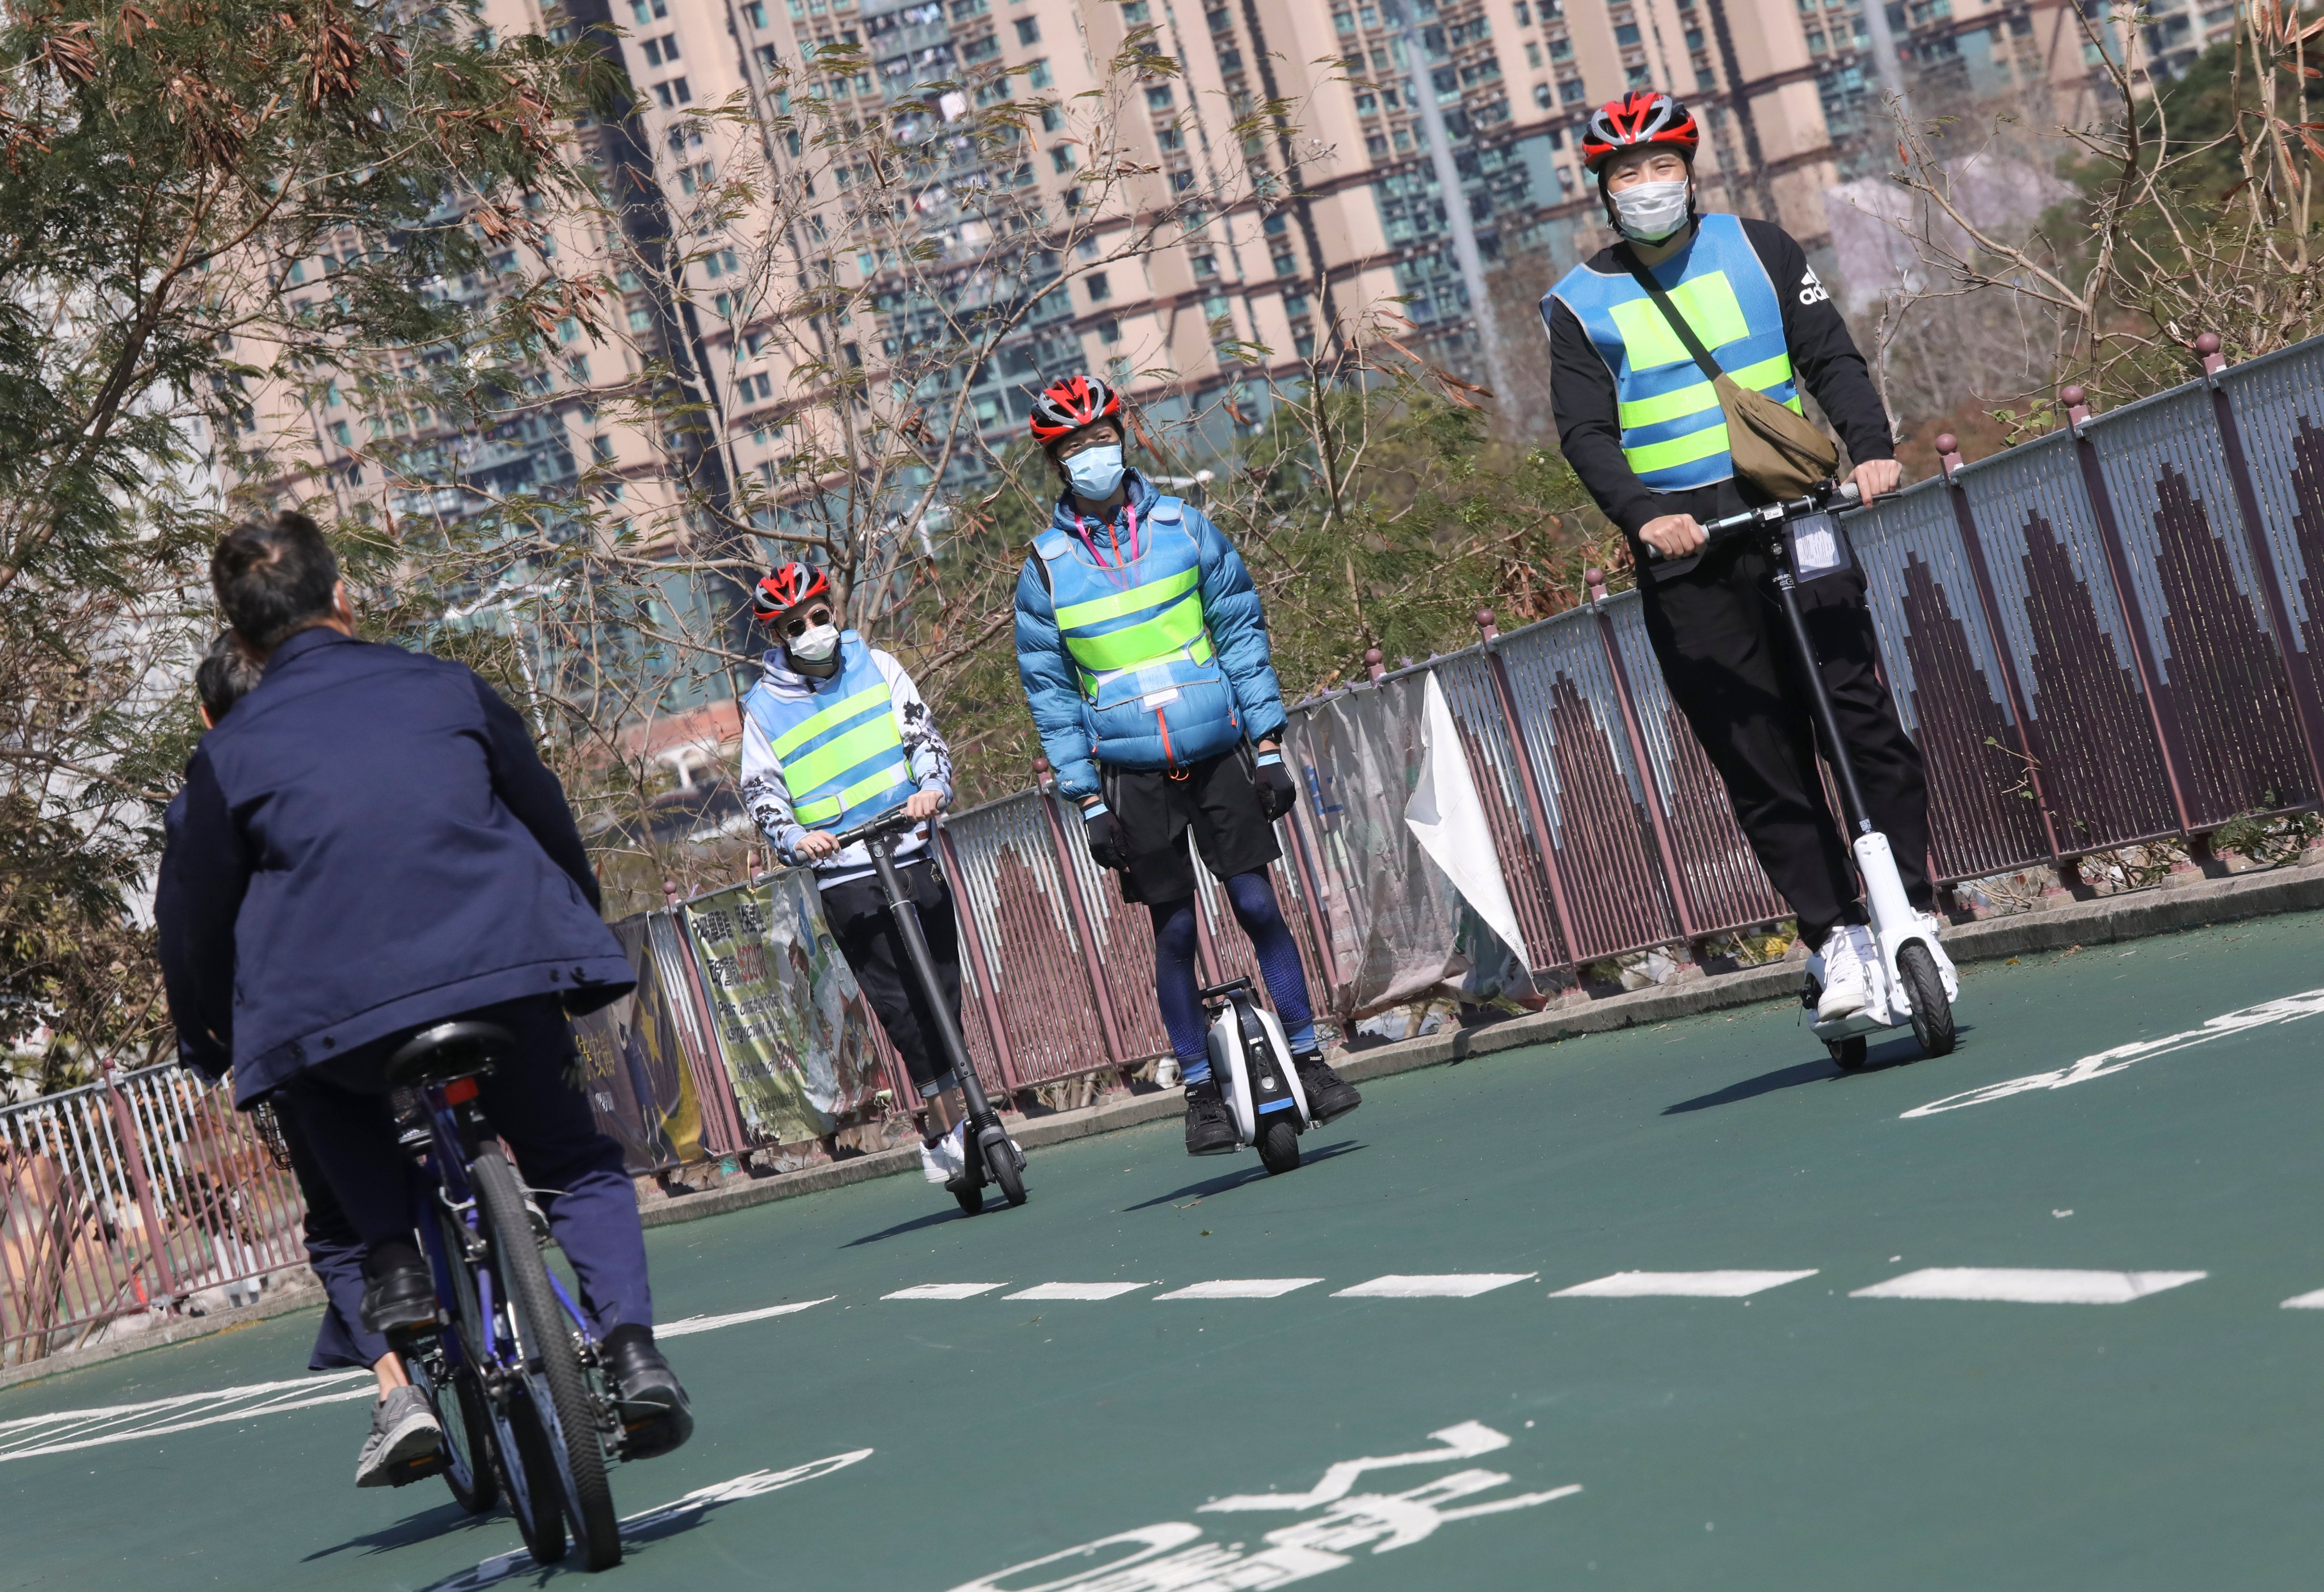 Staff of the Transport Department test safety requirements on the use of electric mobility devices at  Tseung Kwan O Waterfront Park. Photo: K.Y. Cheng